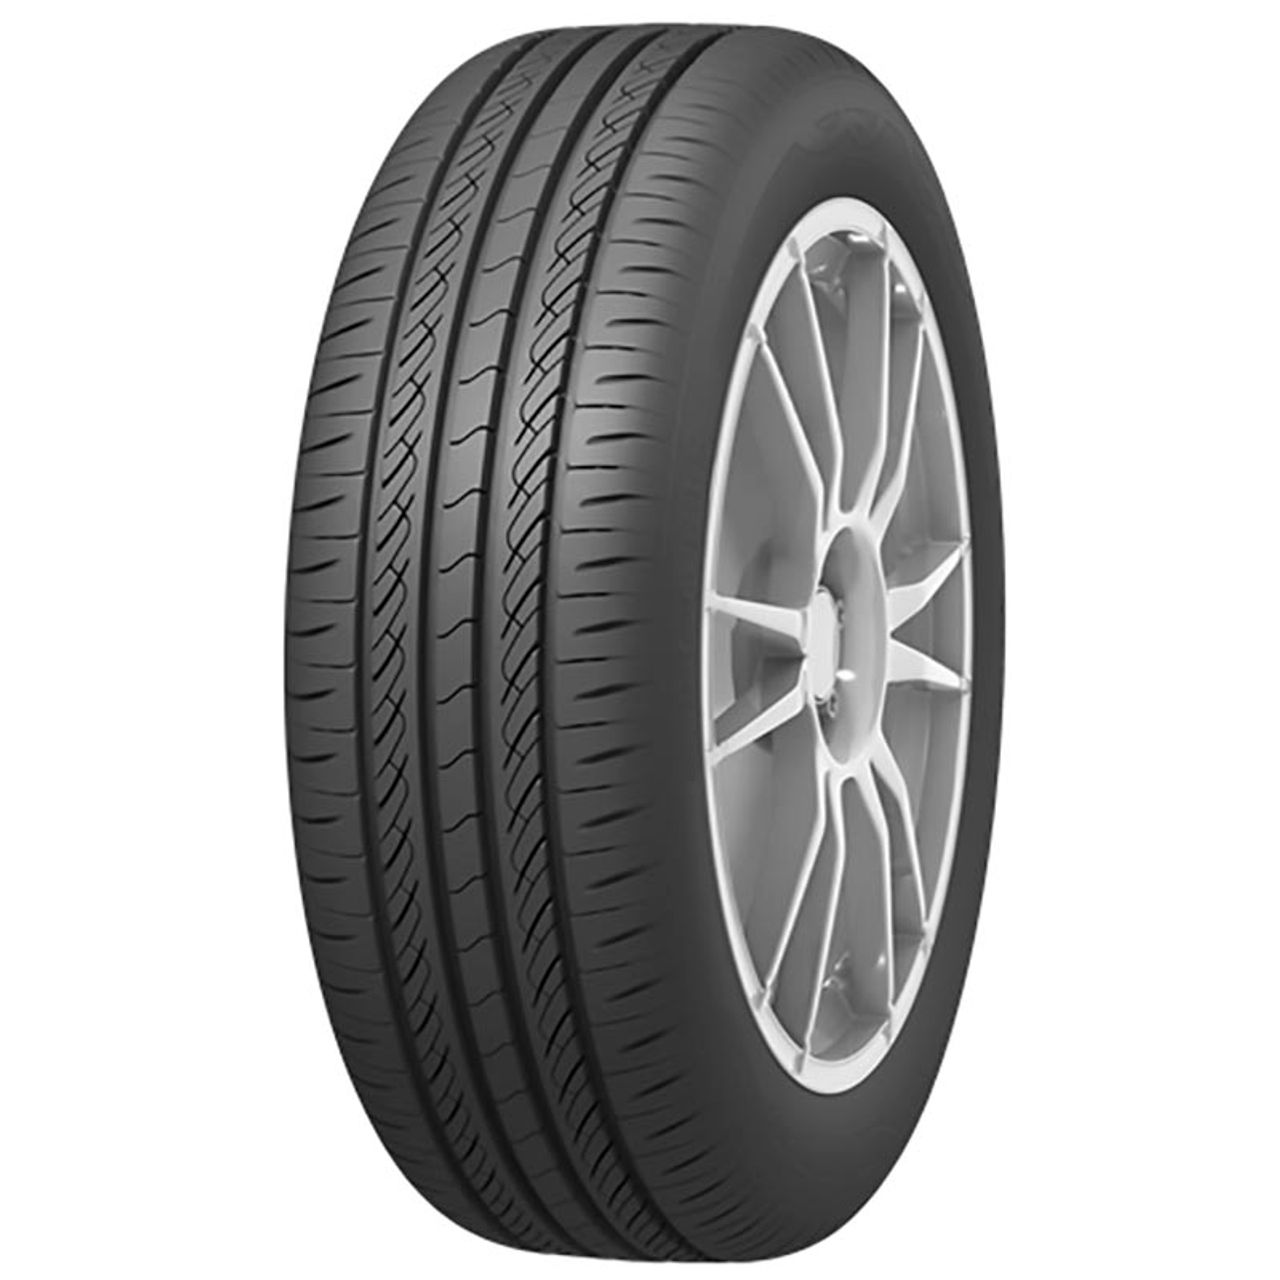 INFINITY ECOSIS 185/65R14 86H BSW